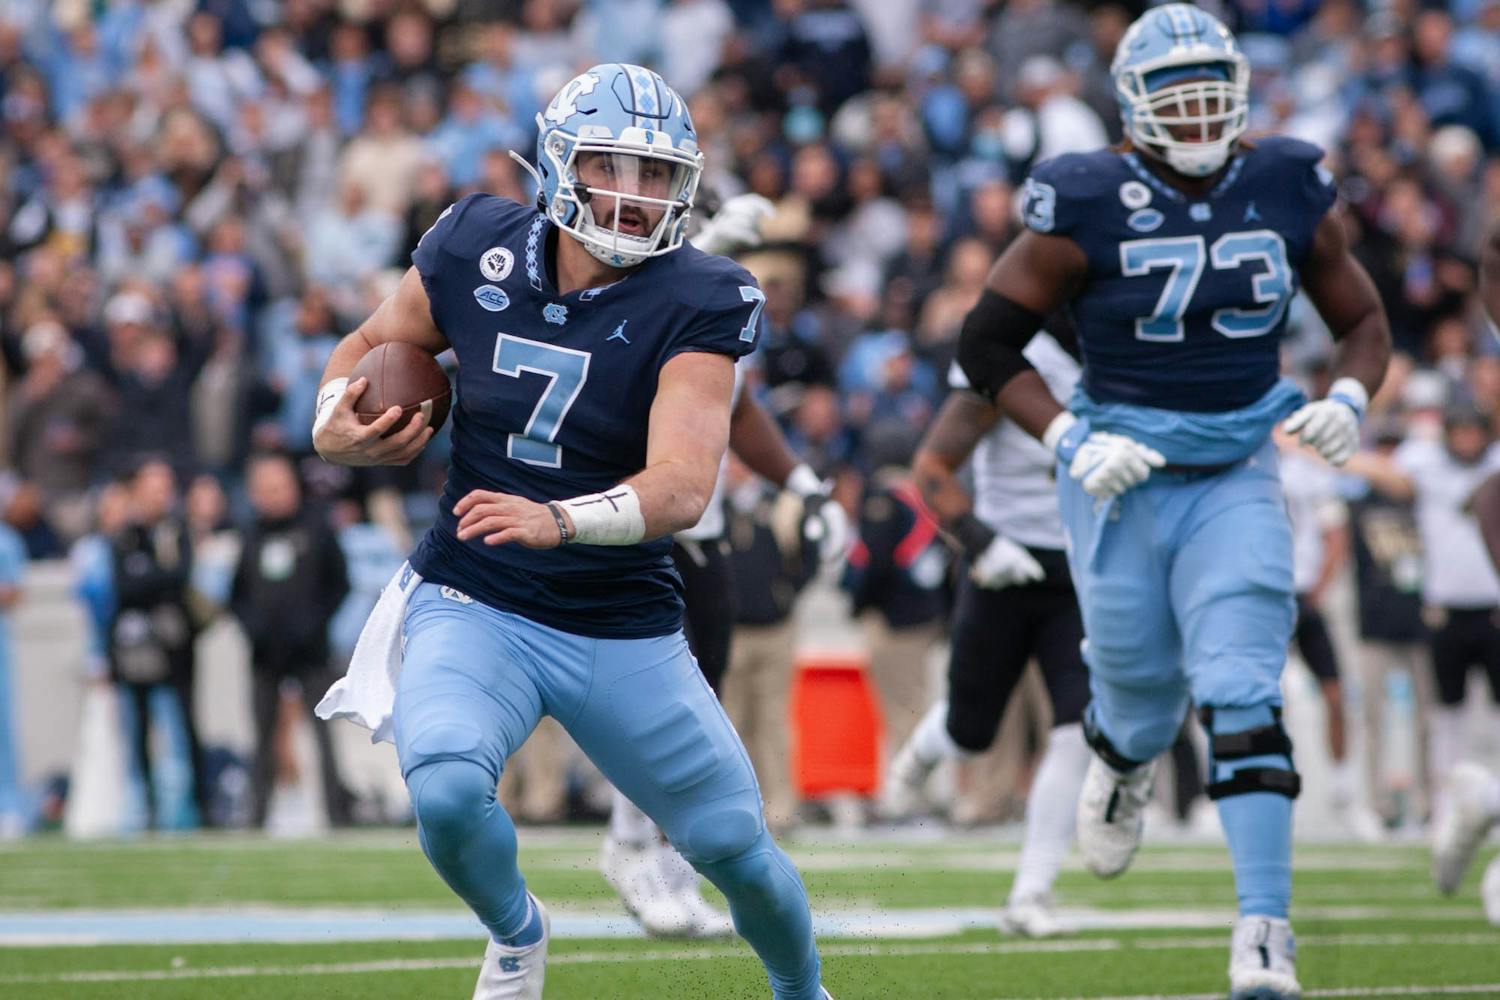 Junior quarterback Sam Howell runs with the ball during the UNC 